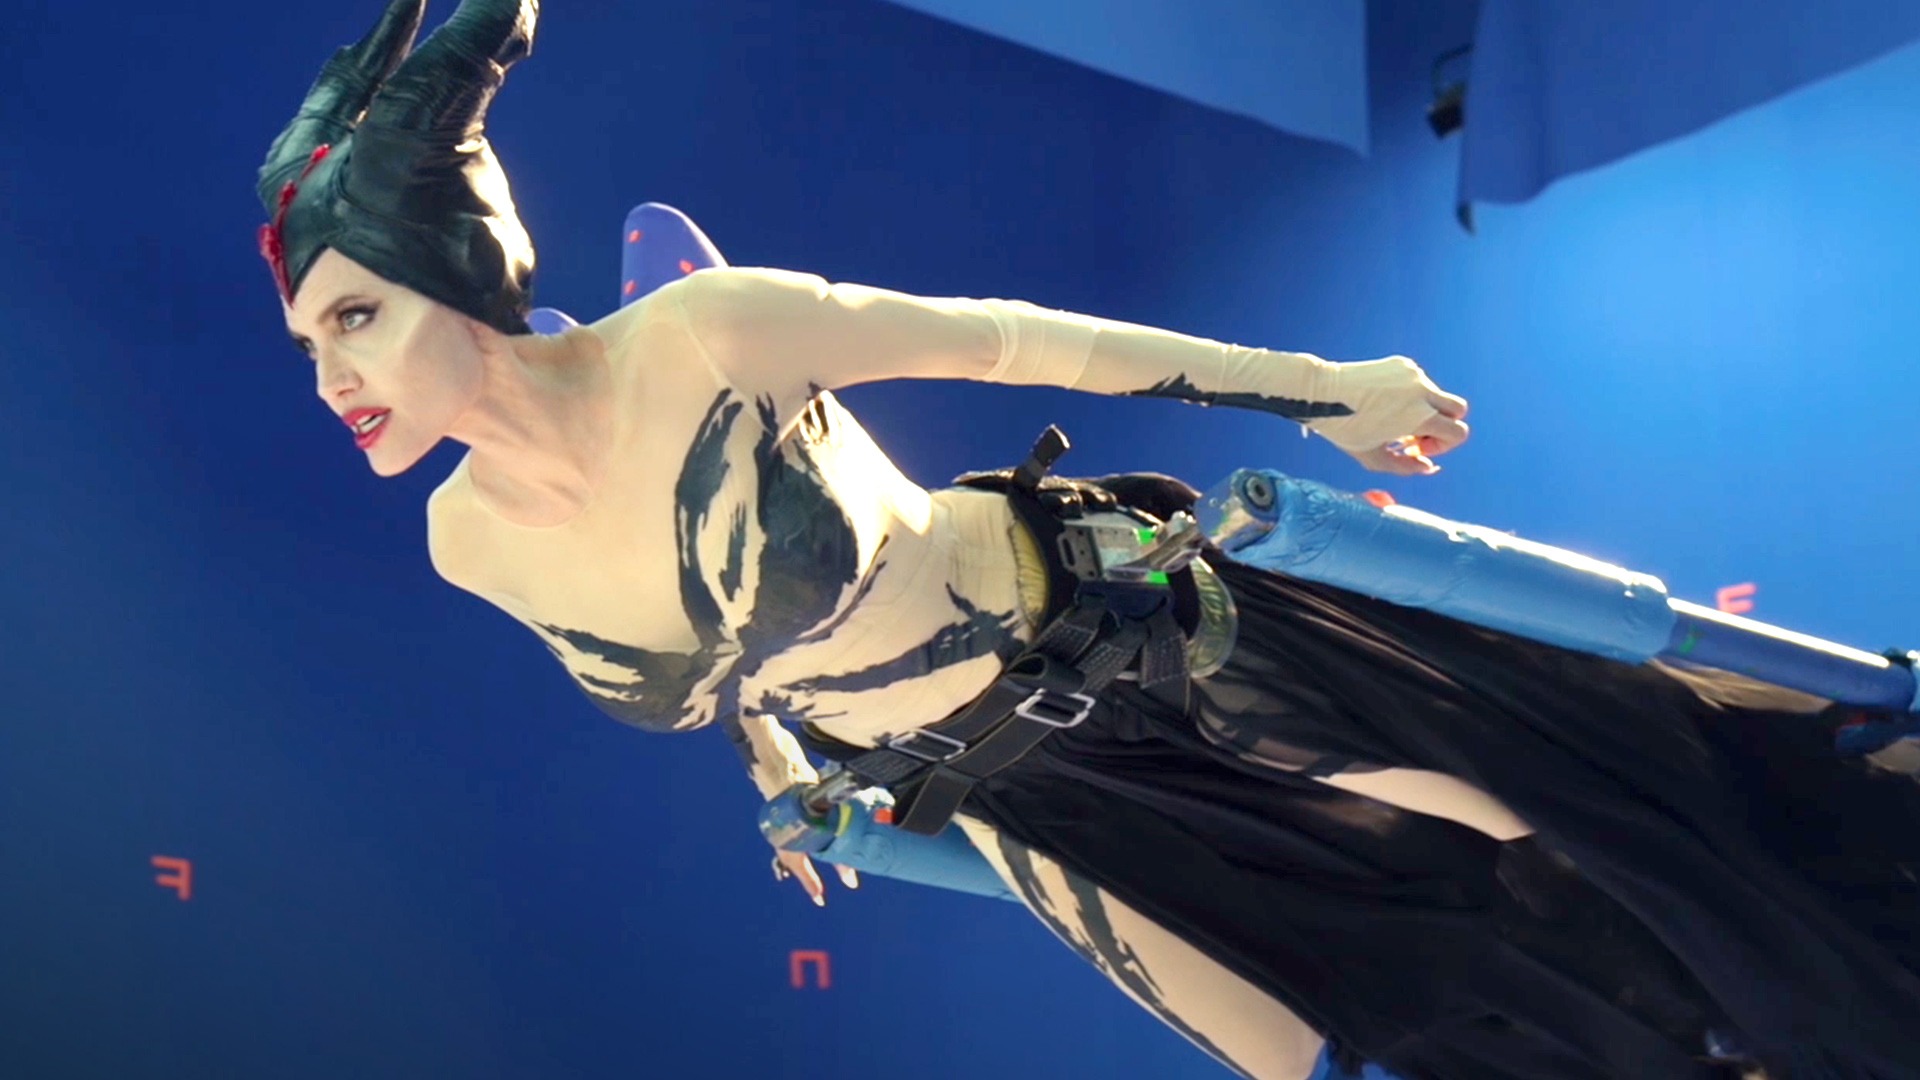 Maleficent: Mistress of Evil: Exclusive Behind the Scenes - Flying the Fey  - Trailers & Videos